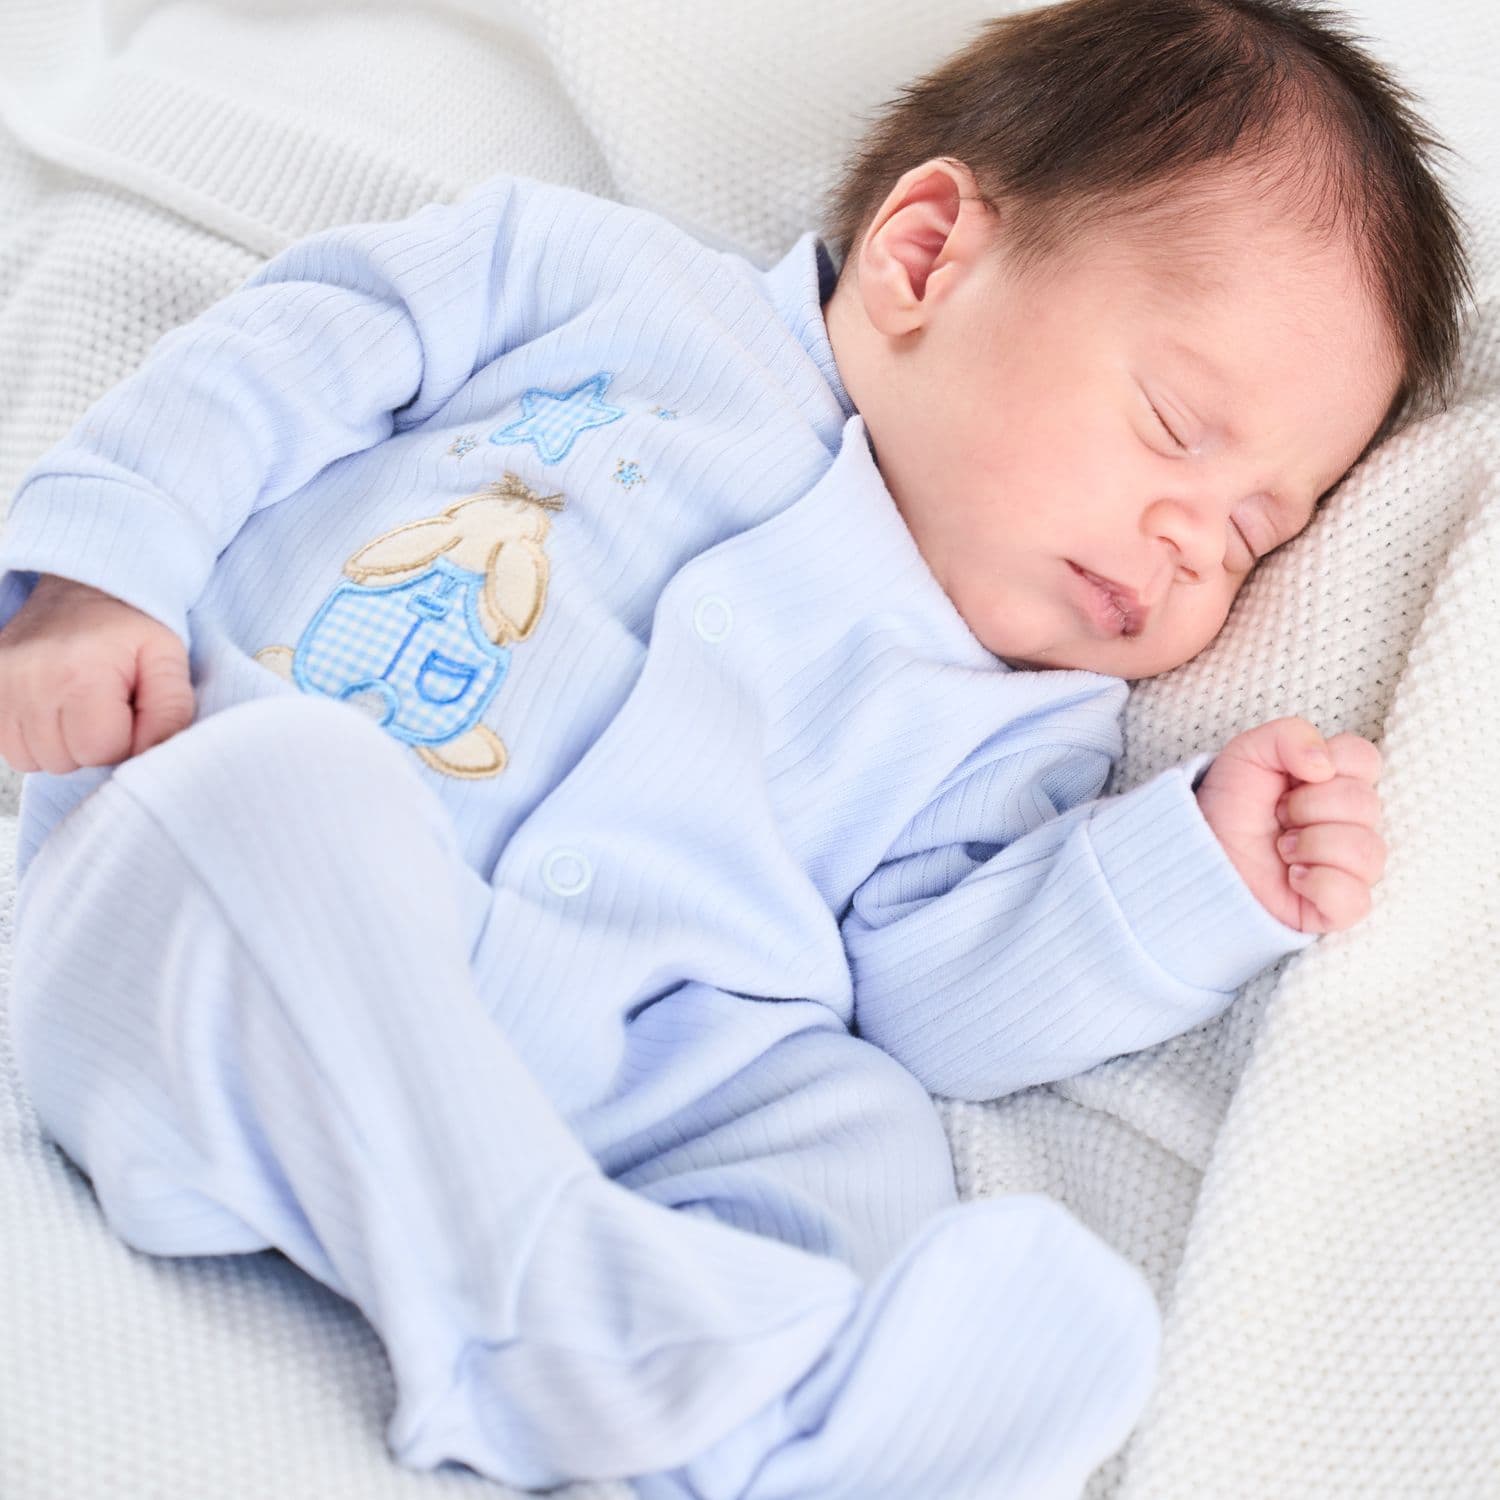 This blue ribbed sleepsuit is designed specifically for premature baby boys by Dandelion, providing maximum comfort and breathability. Made from 100% cotton, it features a charming rabbit and teddy motif and convenient push button fastening. Available in sizes 3-5lbs and 5-8lbs, this sleepsuit is perfect for your little one's delicate needs.